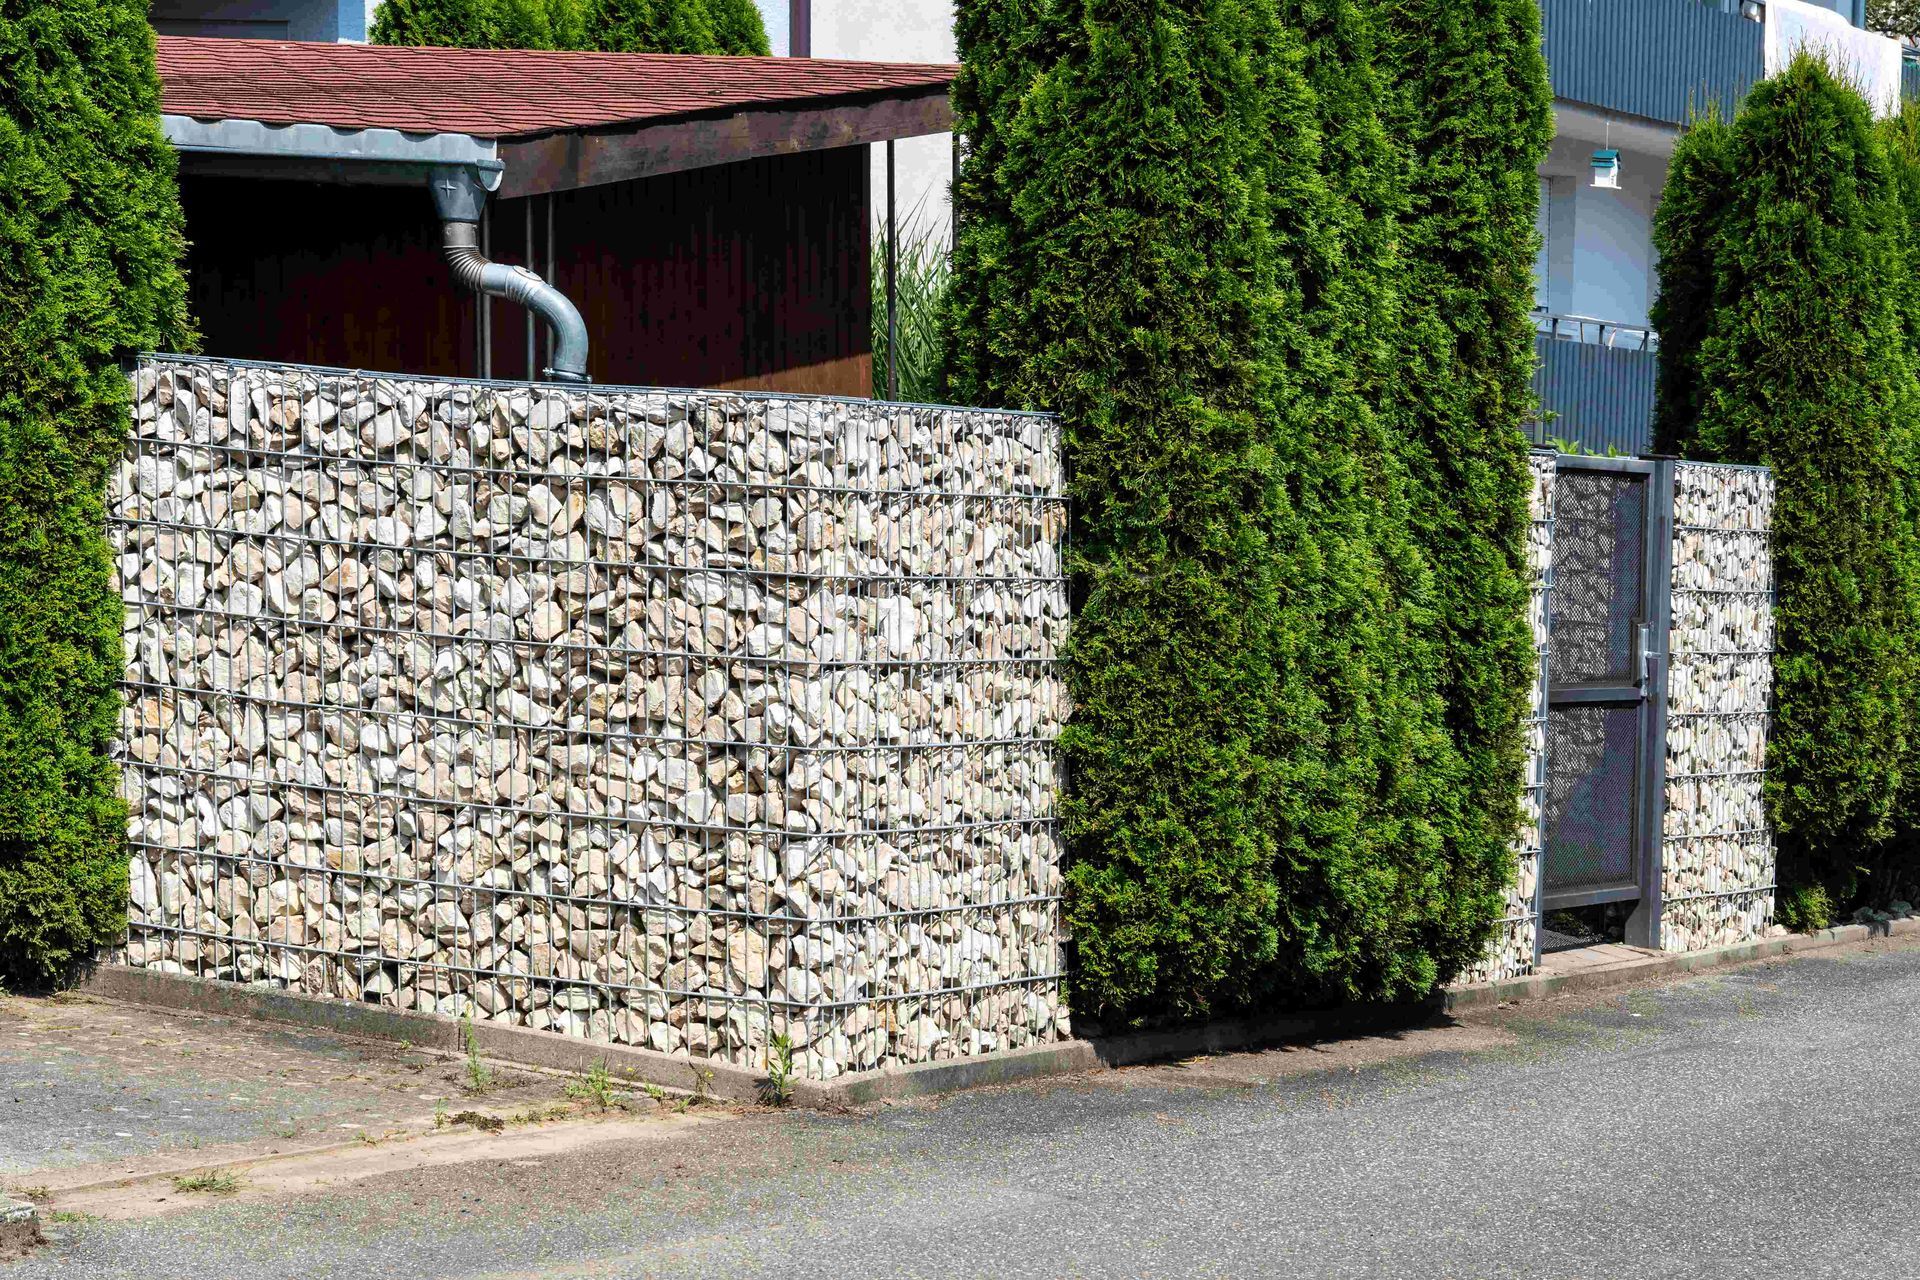 A tall wall built from smaller stones